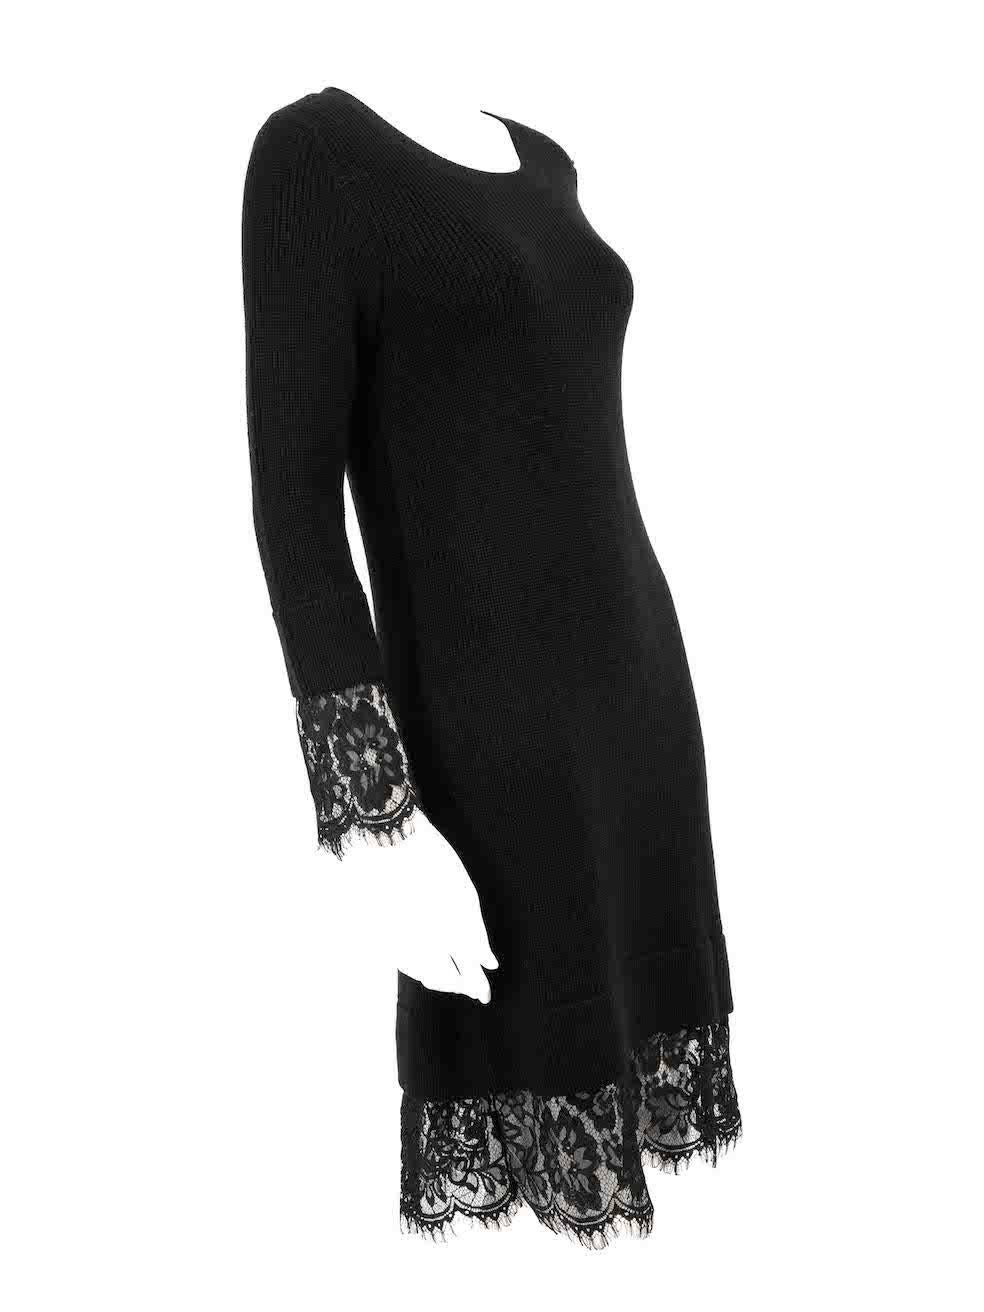 CONDITION is Never worn. No visible wear to dress is evident on this new Moschino designer resale item.
 
 Details
 Black
 Wool
 Knit dress
 Mini
 Long sleeves
 Lace trim
 Round neck
 
 
 Made in China
 
 Composition
 50% Wool, 50% Acrylic
 
 Care